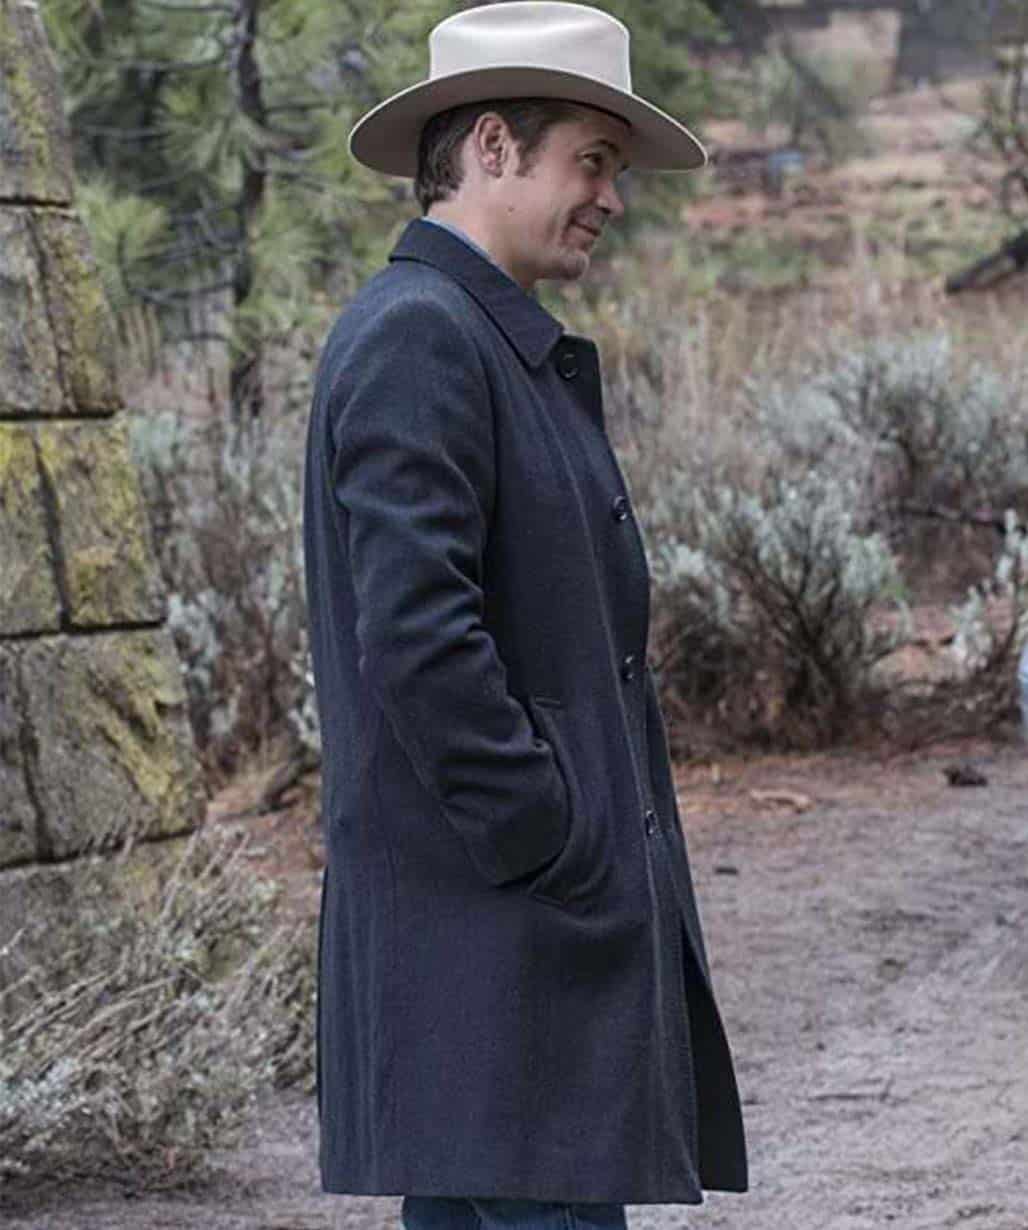 Justified-Raylan-Givens-Black-Trench-Coat